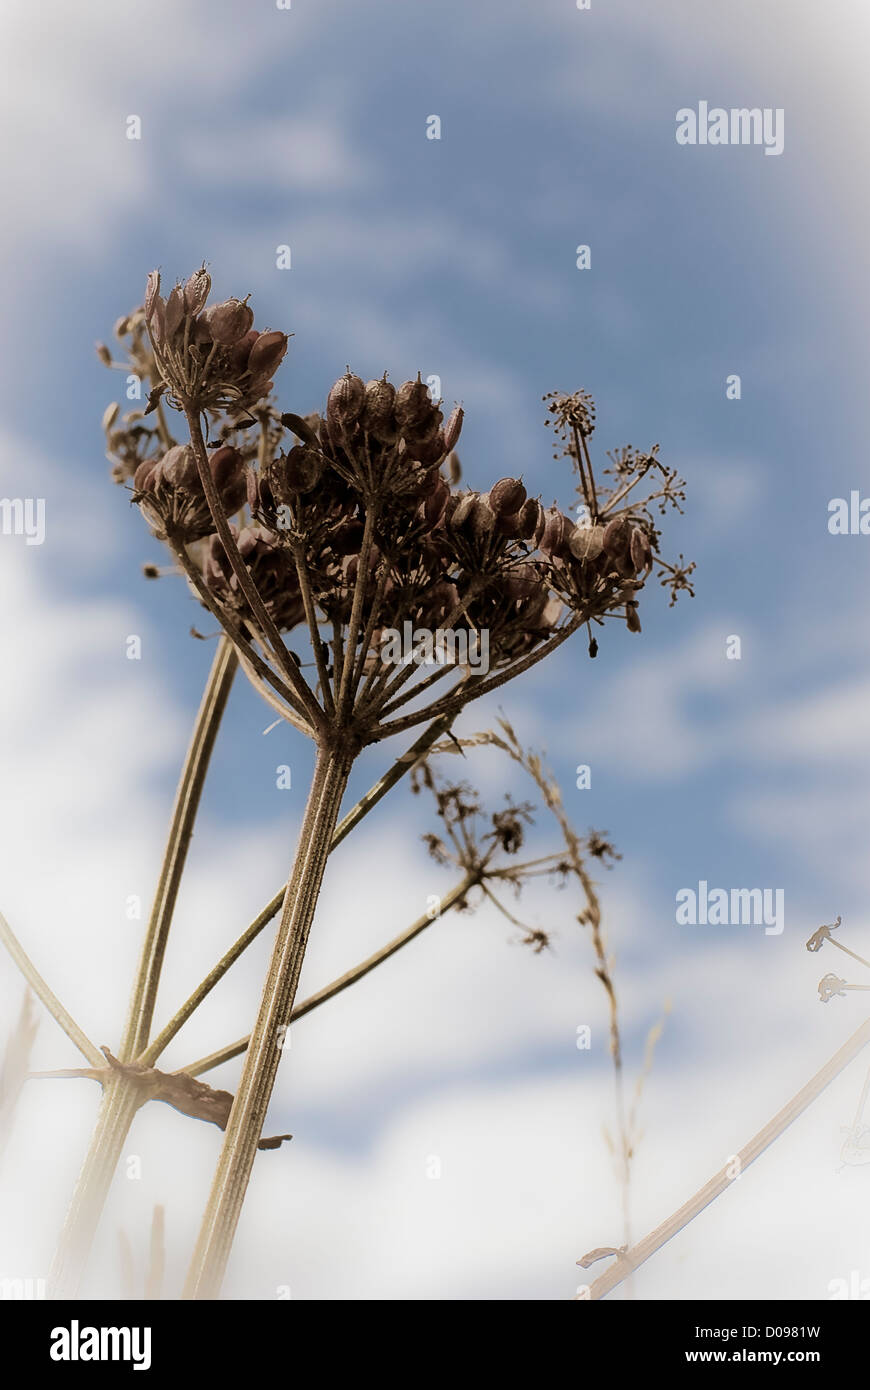 Close-up of cow parsley, plant, against blue sky, black and white, cross processed, plant close up Stock Photo